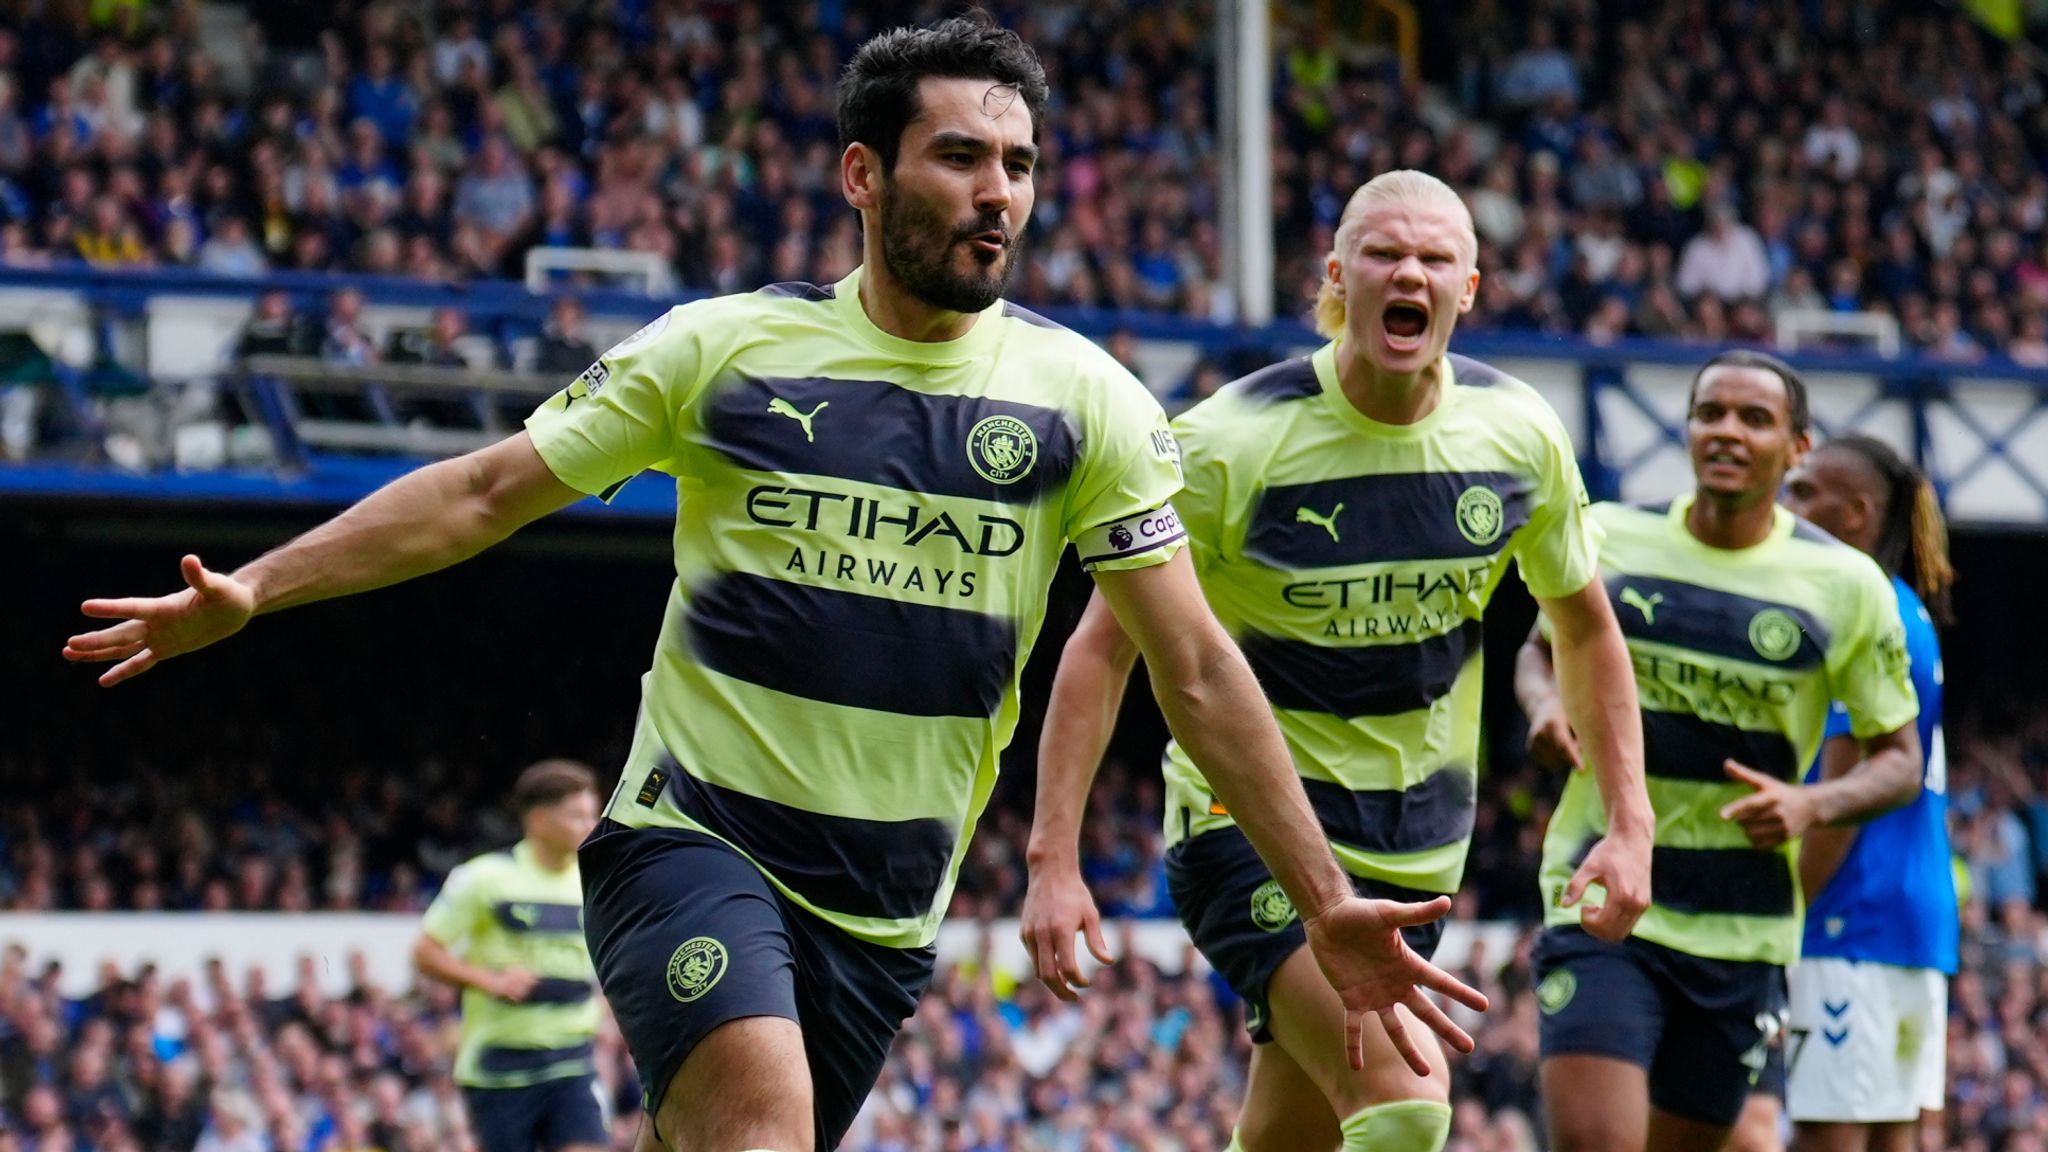 Everton 0-3 Manchester City: Ilkay Gundogan's two fine individual goals help defending champions close in on Premier League title | Football News | Sky Sports